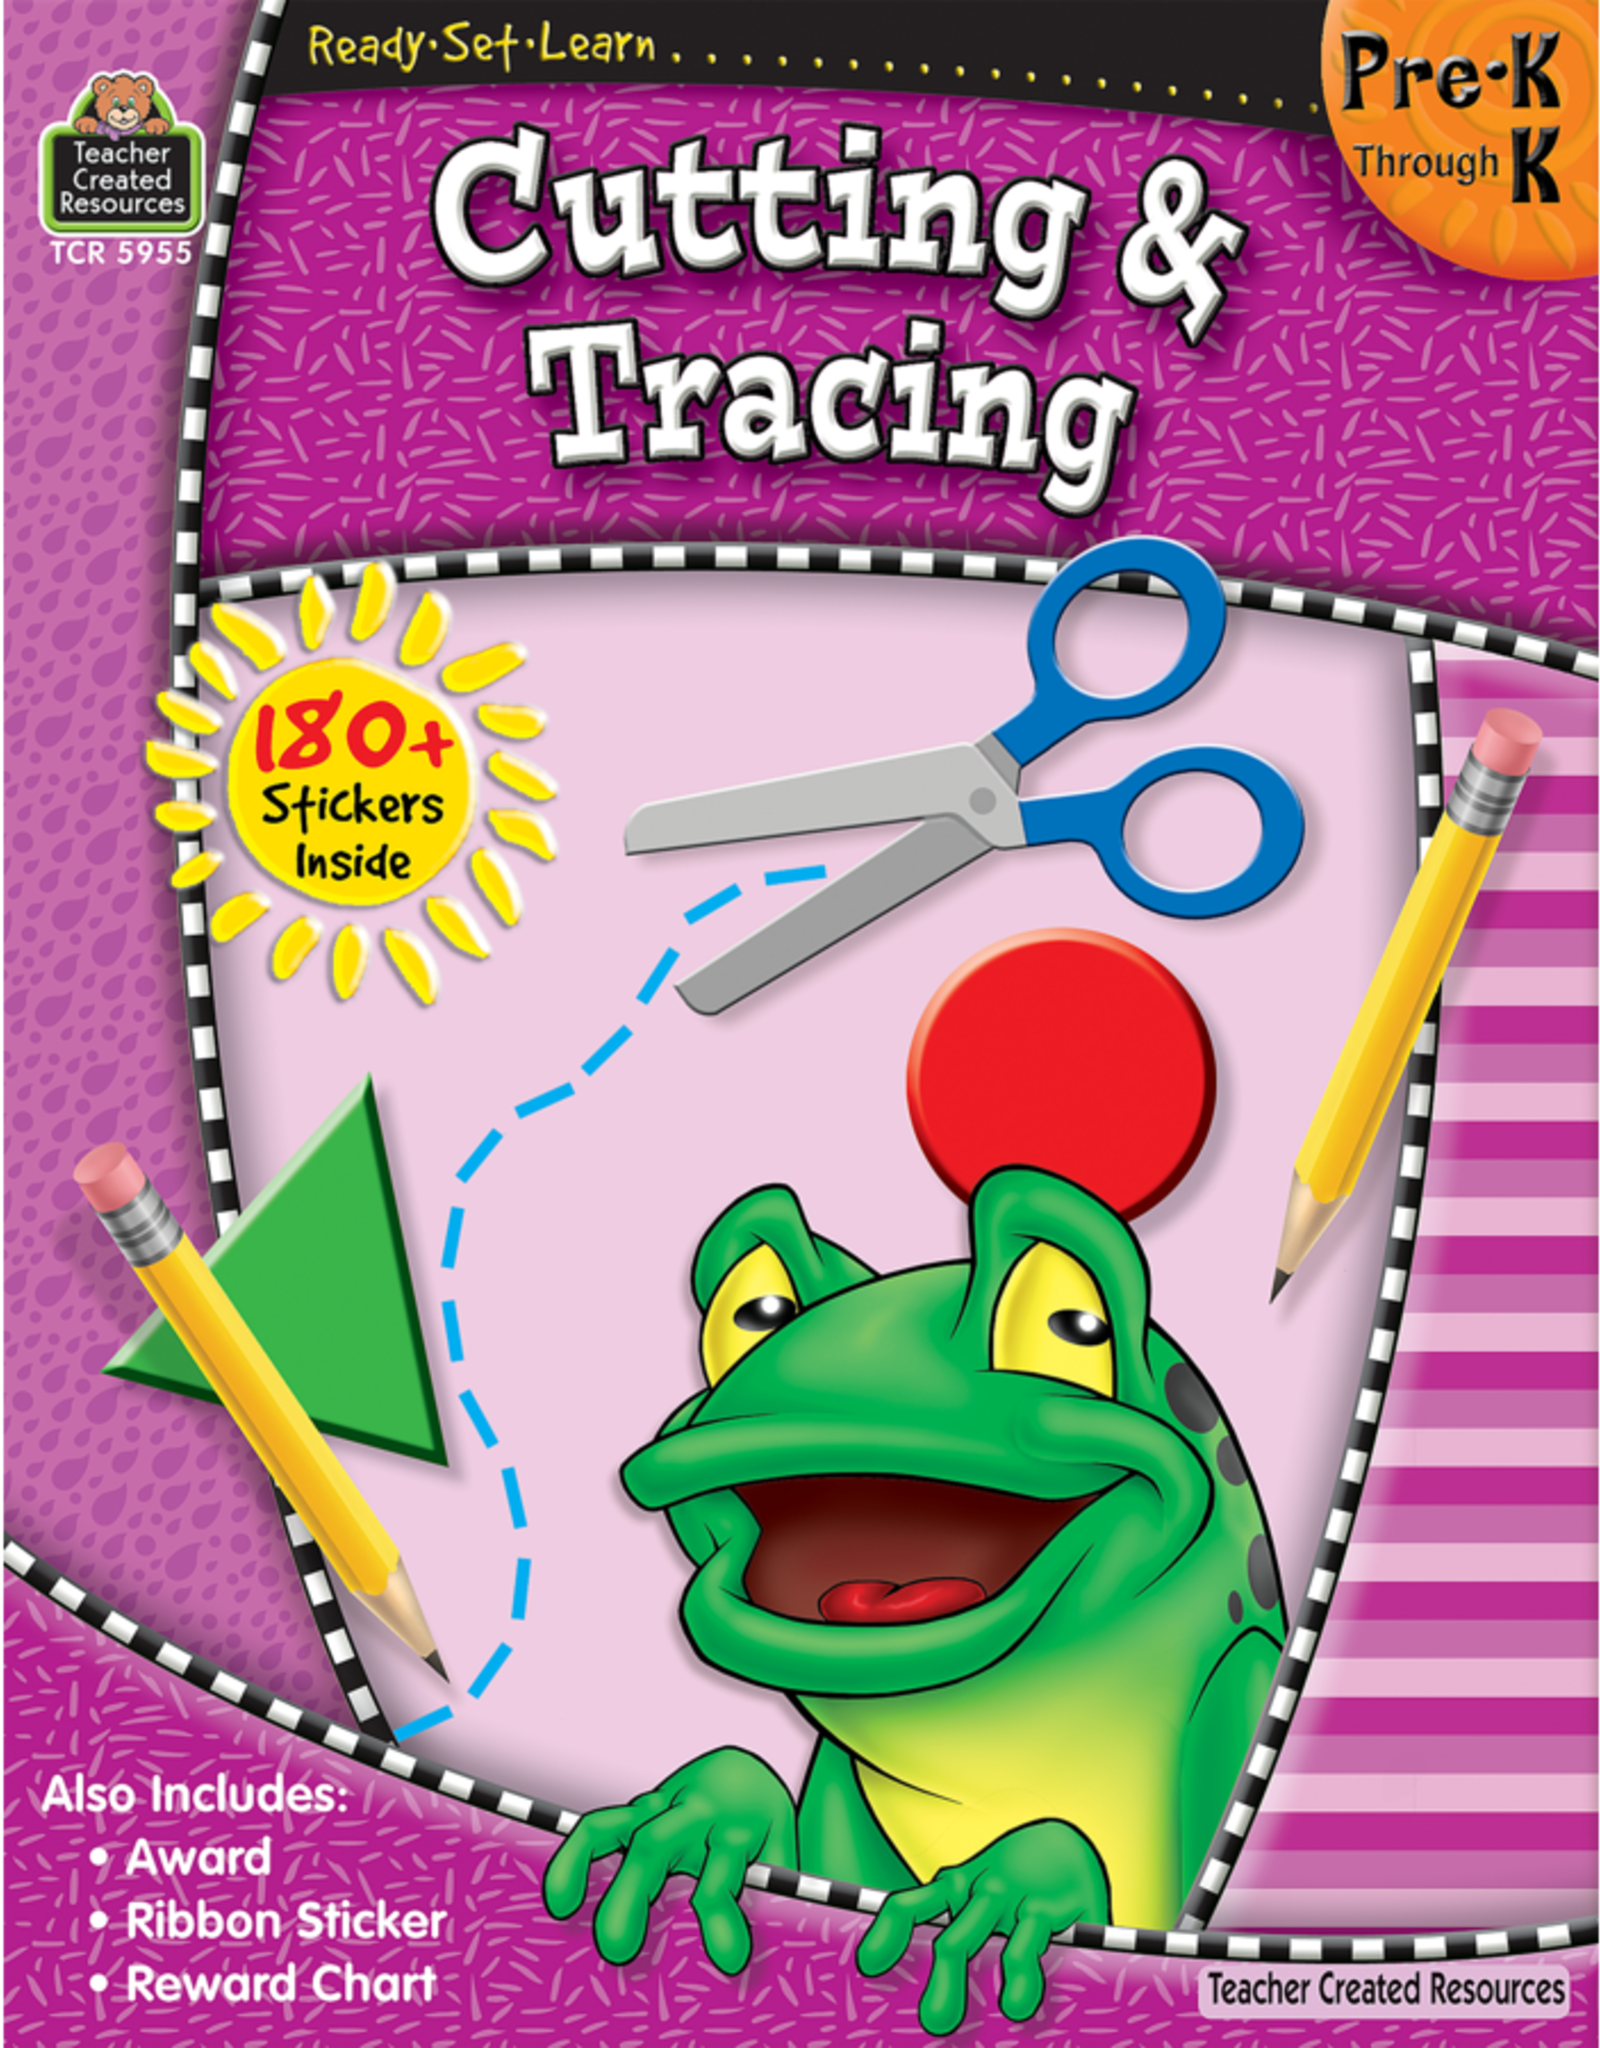 Teacher Created Resources Ready-Set-Learn: Cutting & Tracing